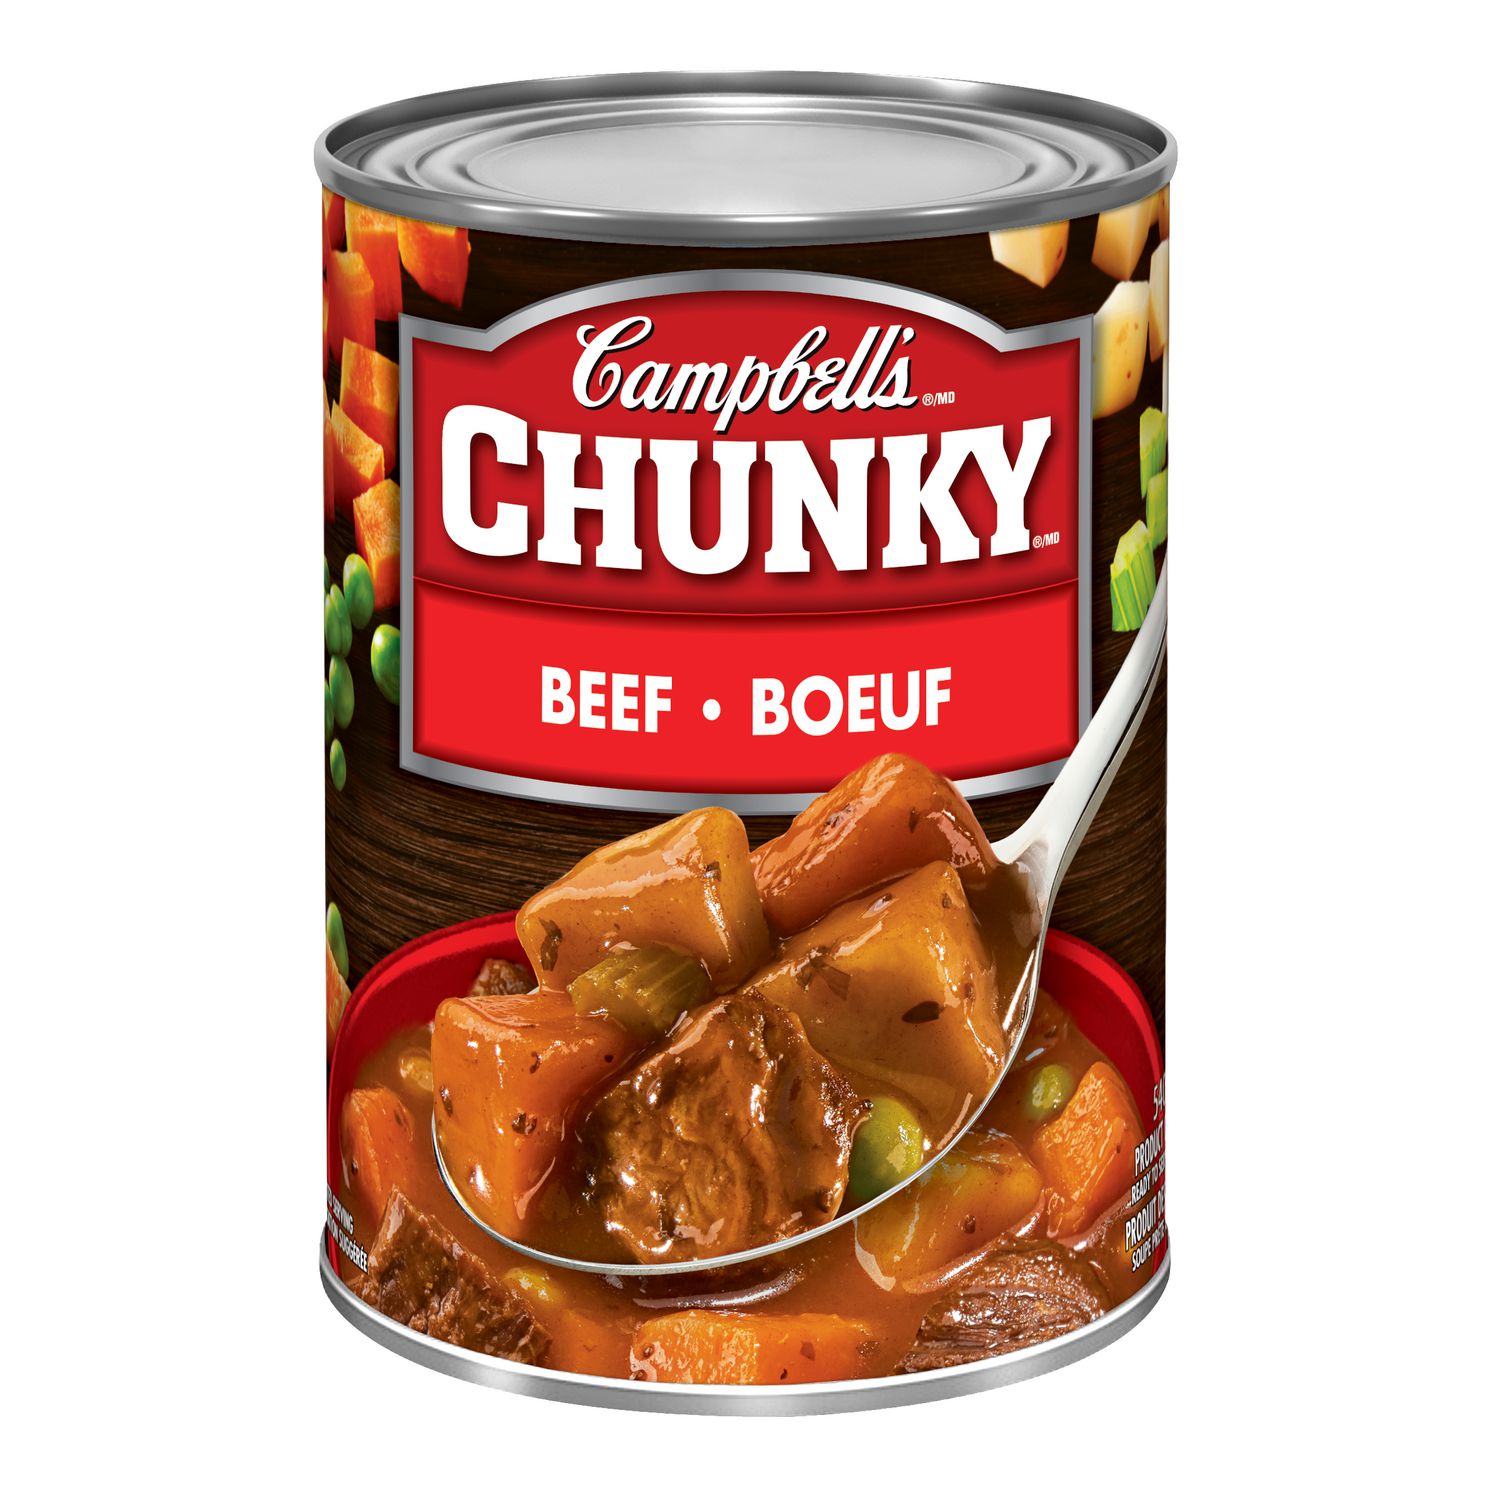 Campbells Chunky Beef Soup